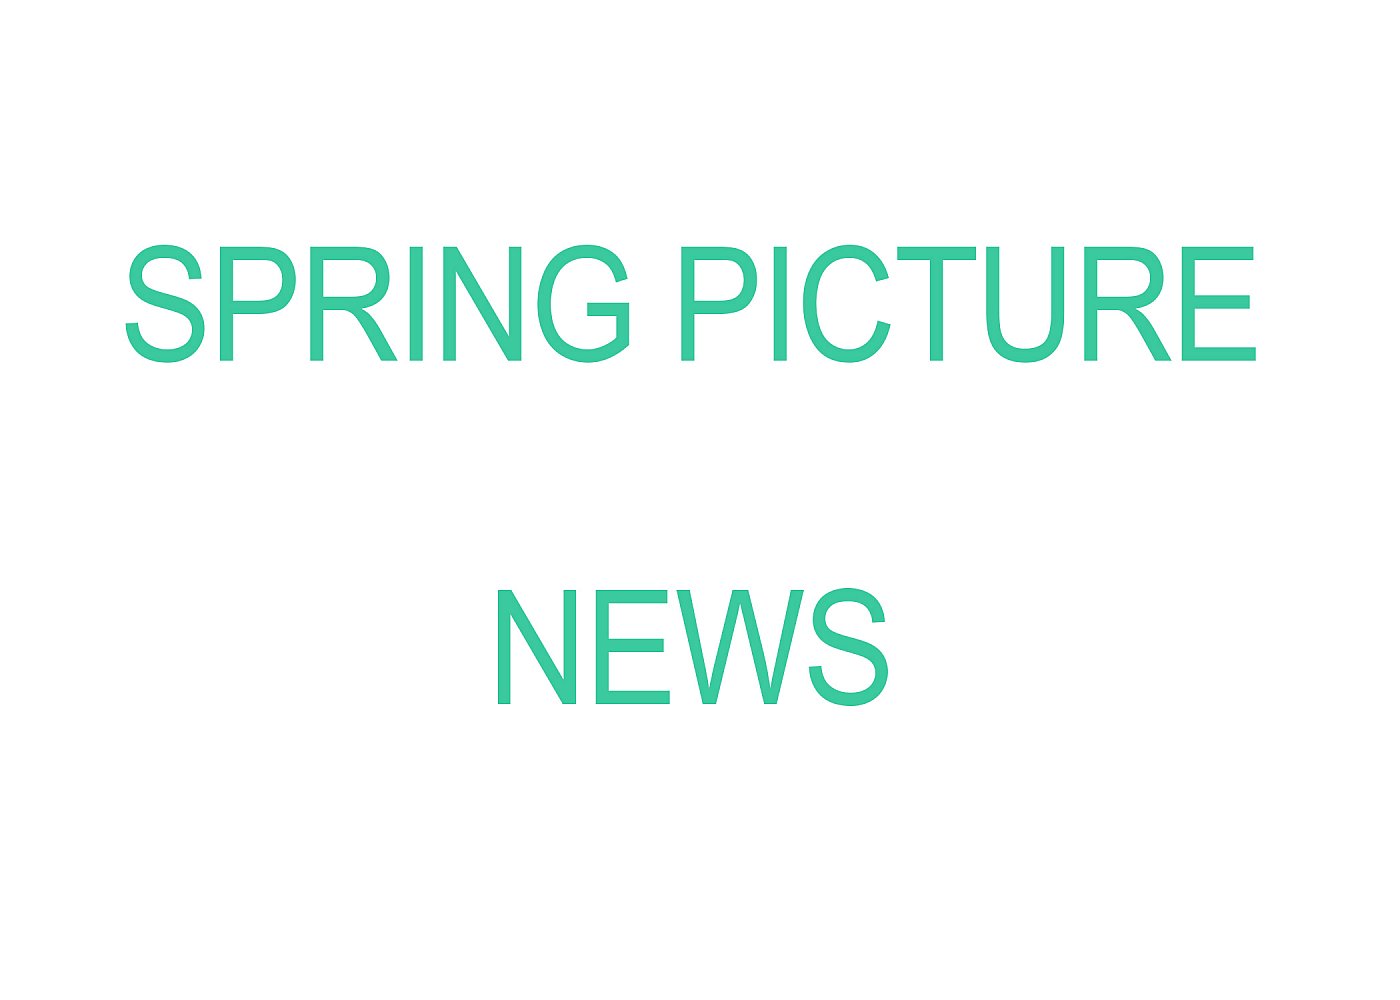 Spring Picture News  Updated APRIL 12, 2022